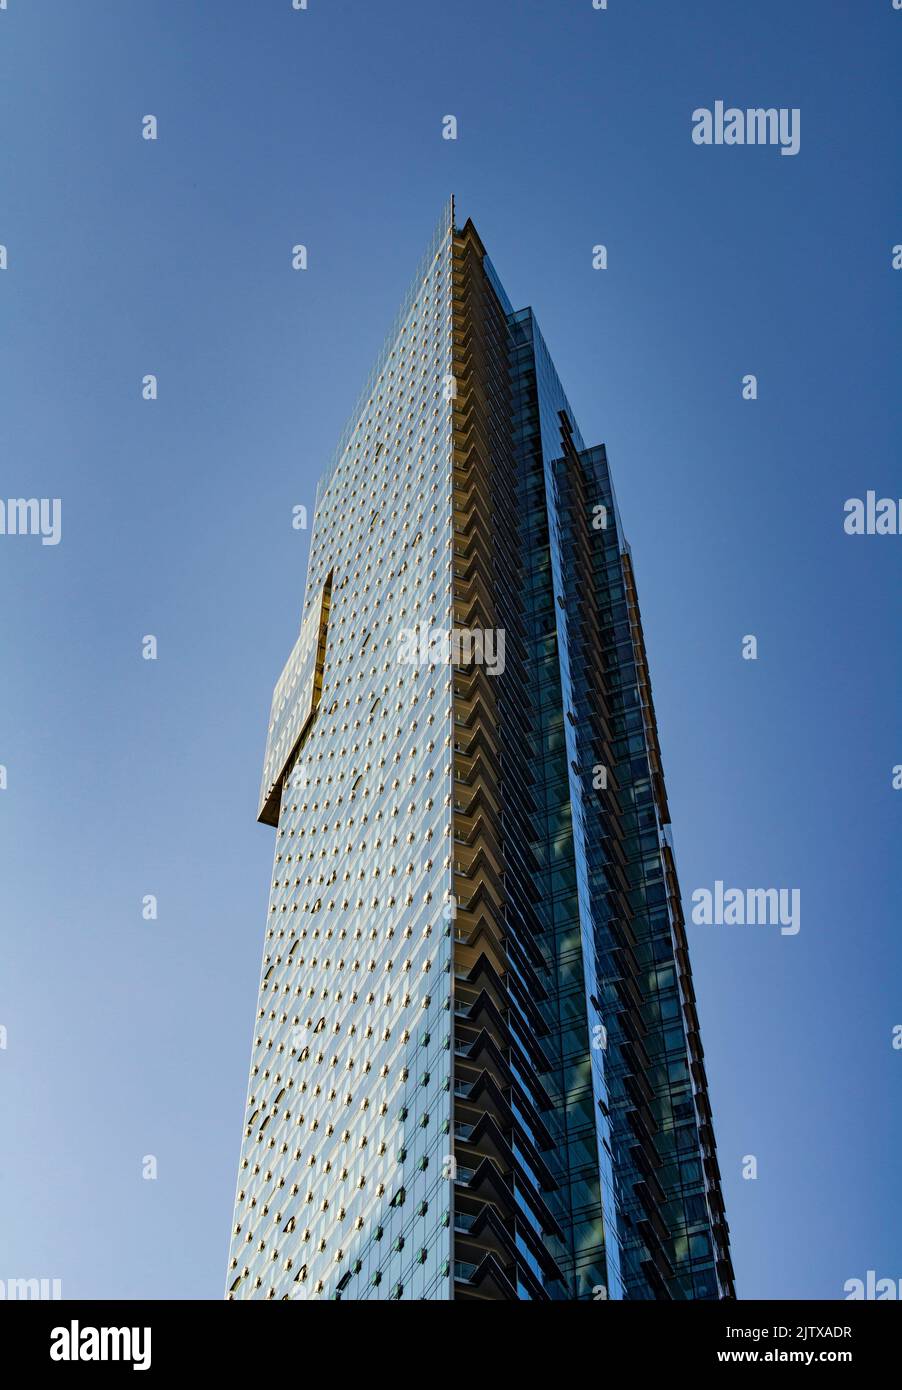 The Living Shangri-la tower in Vancouver, BC, Canada, the tallest building in the city. Stock Photo